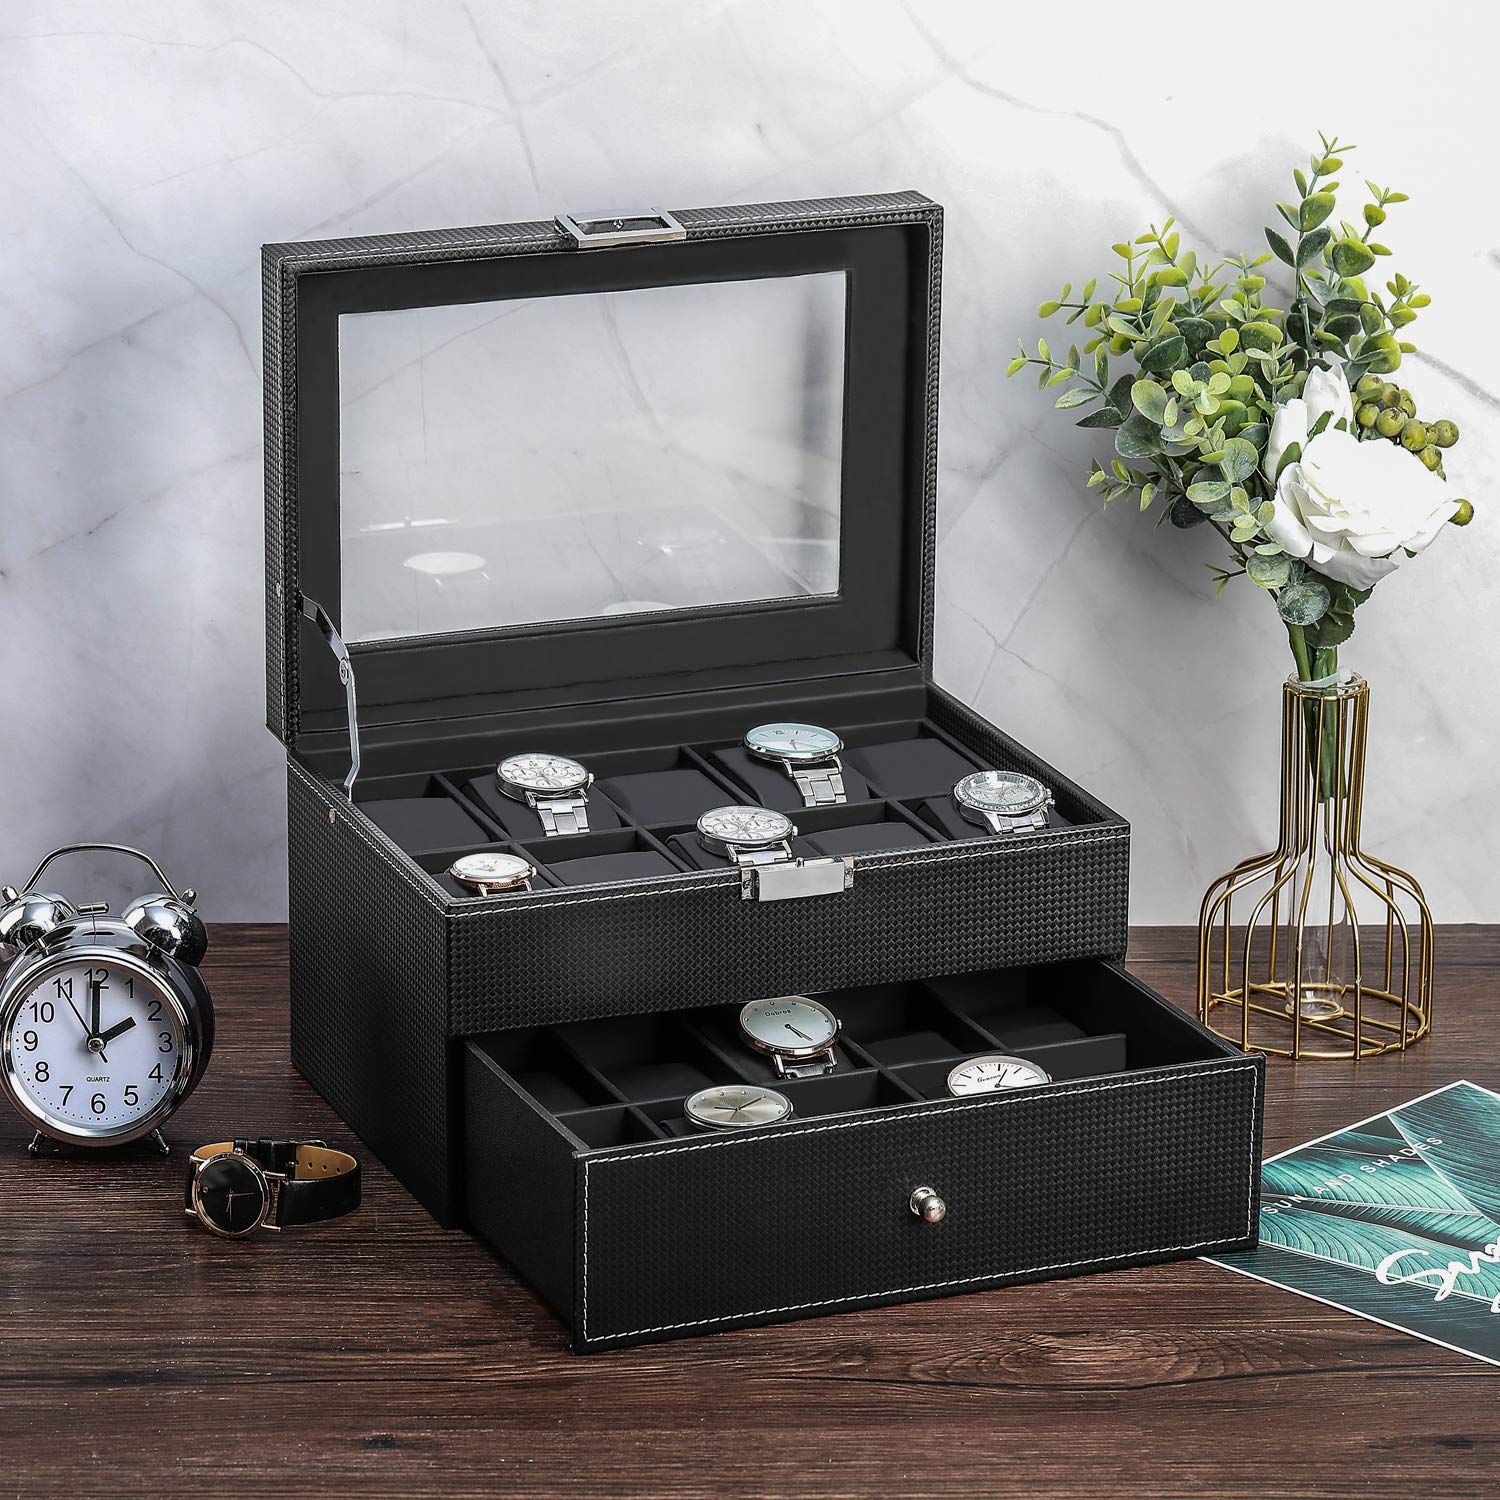 BASTUO Watch Box 20 Watch Display Organizer Storage Case Luxury Carbon Fiber Leather, Jewelry Collection Box for Men and Women, Black with Glass Top